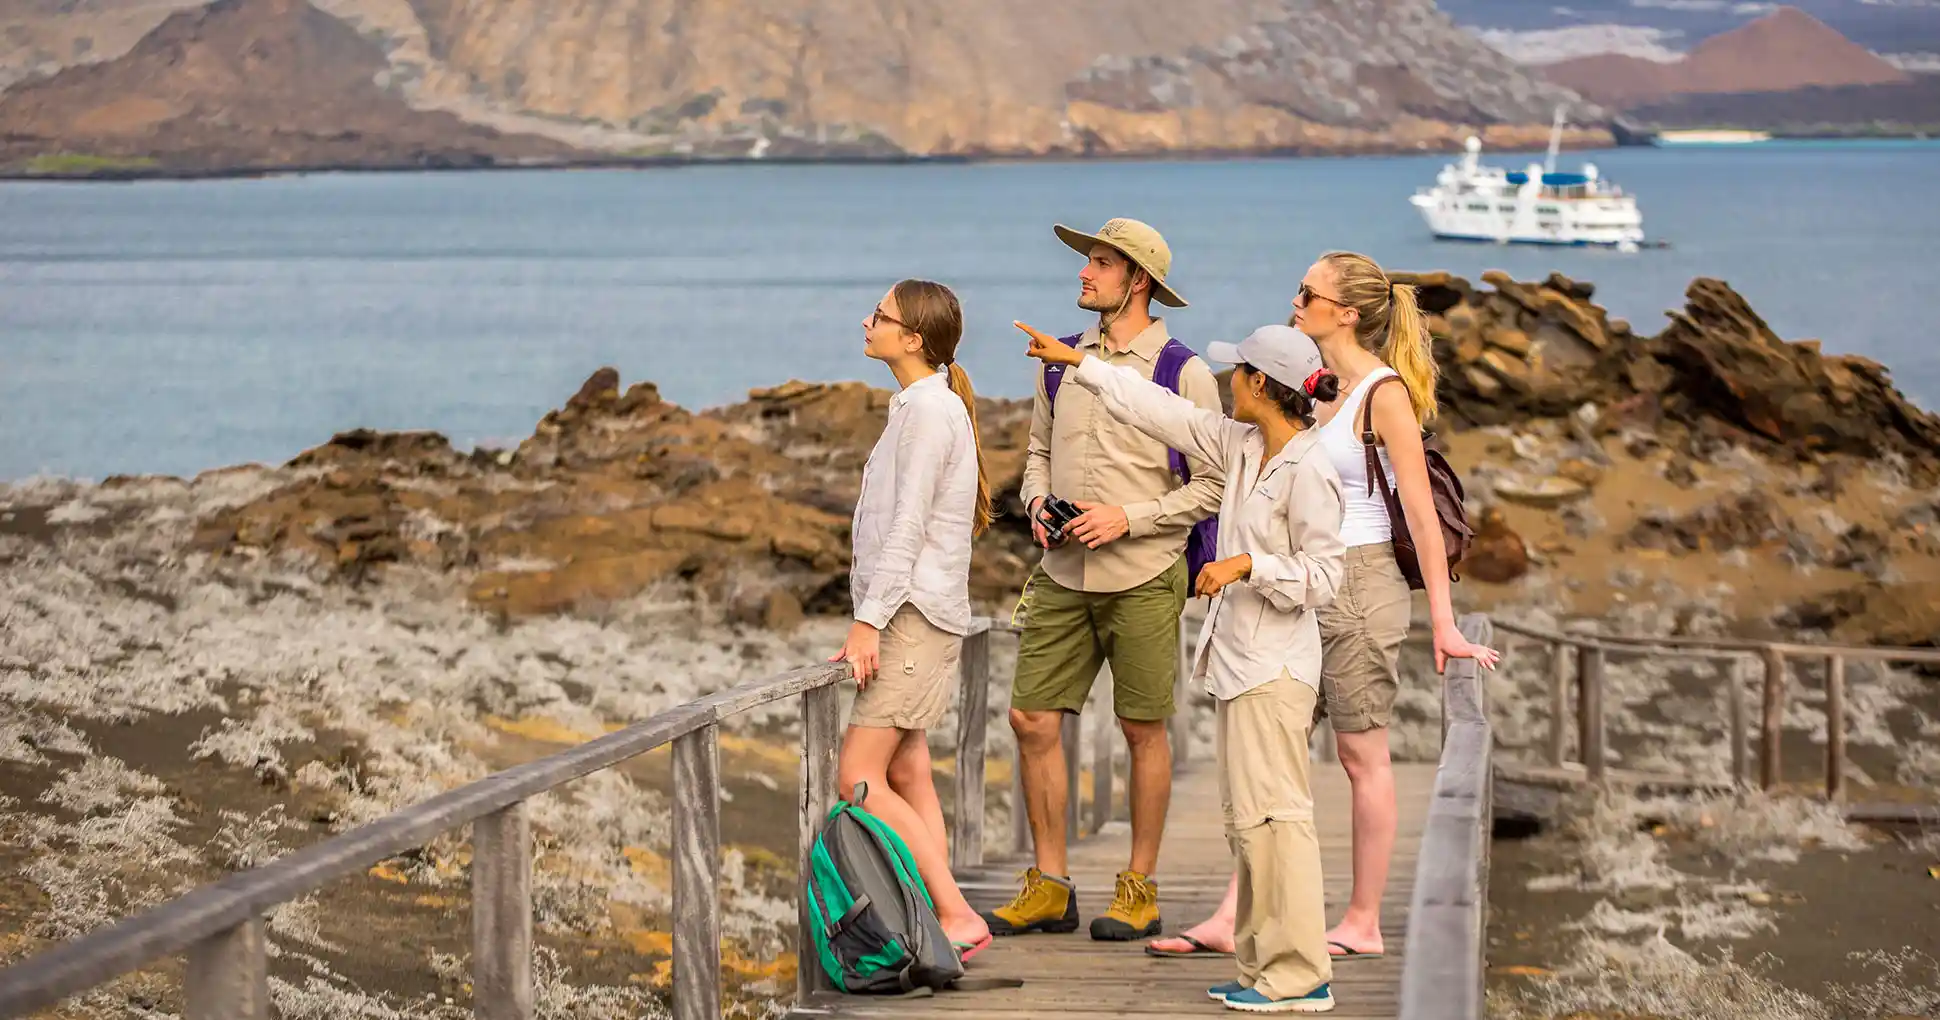 Explorations on the Galapagos Islands